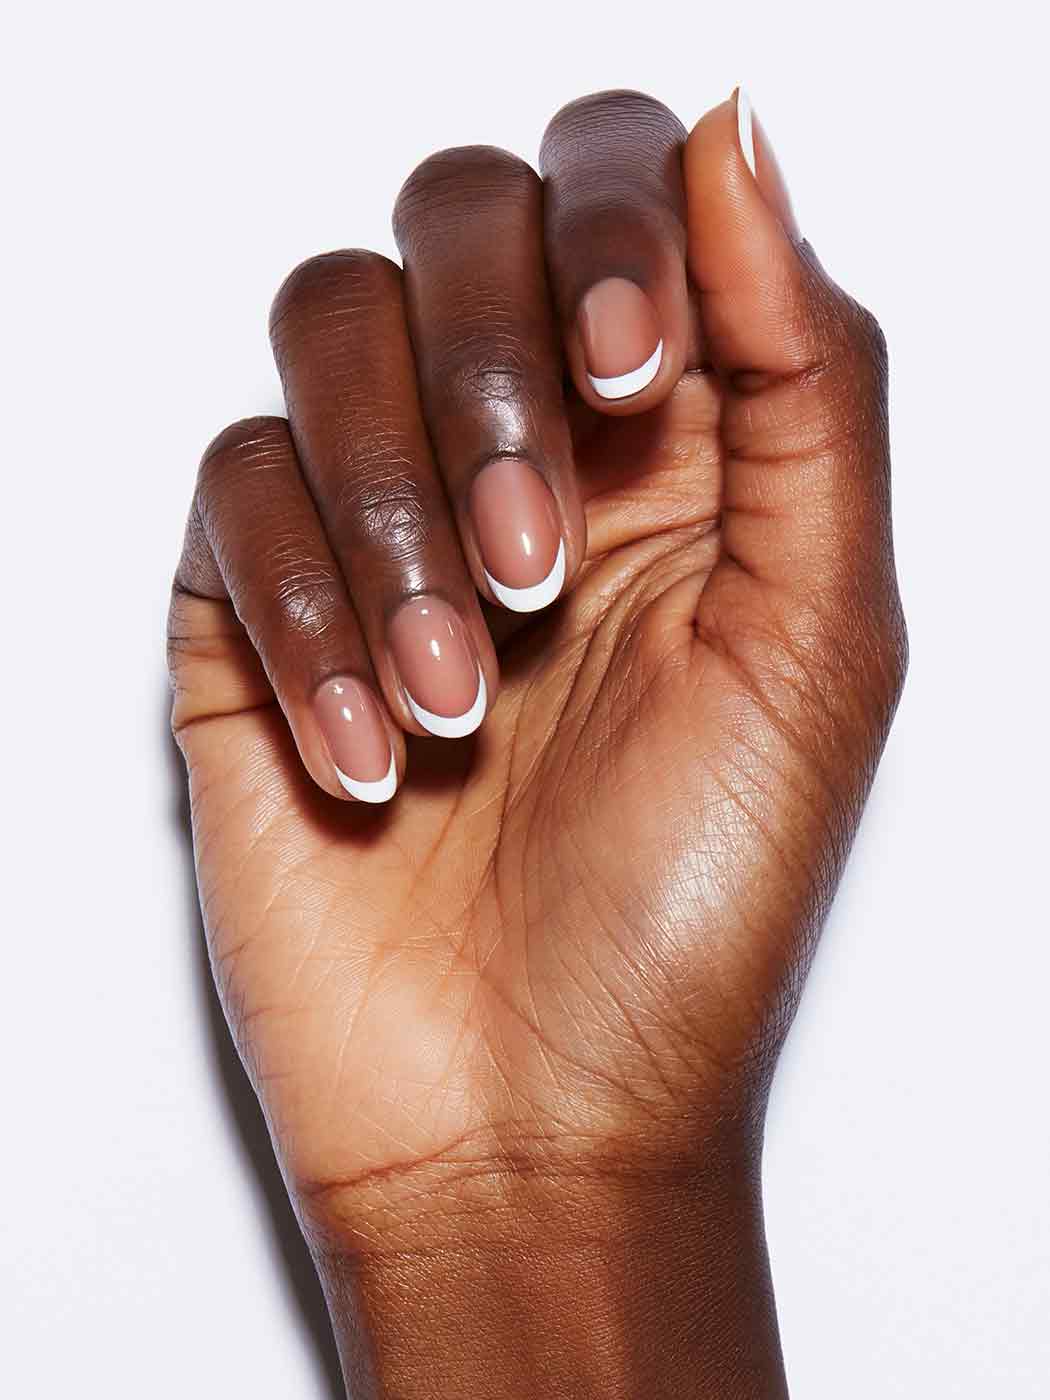 40+ Peach Nail Designs That Are Cheerful and Chic